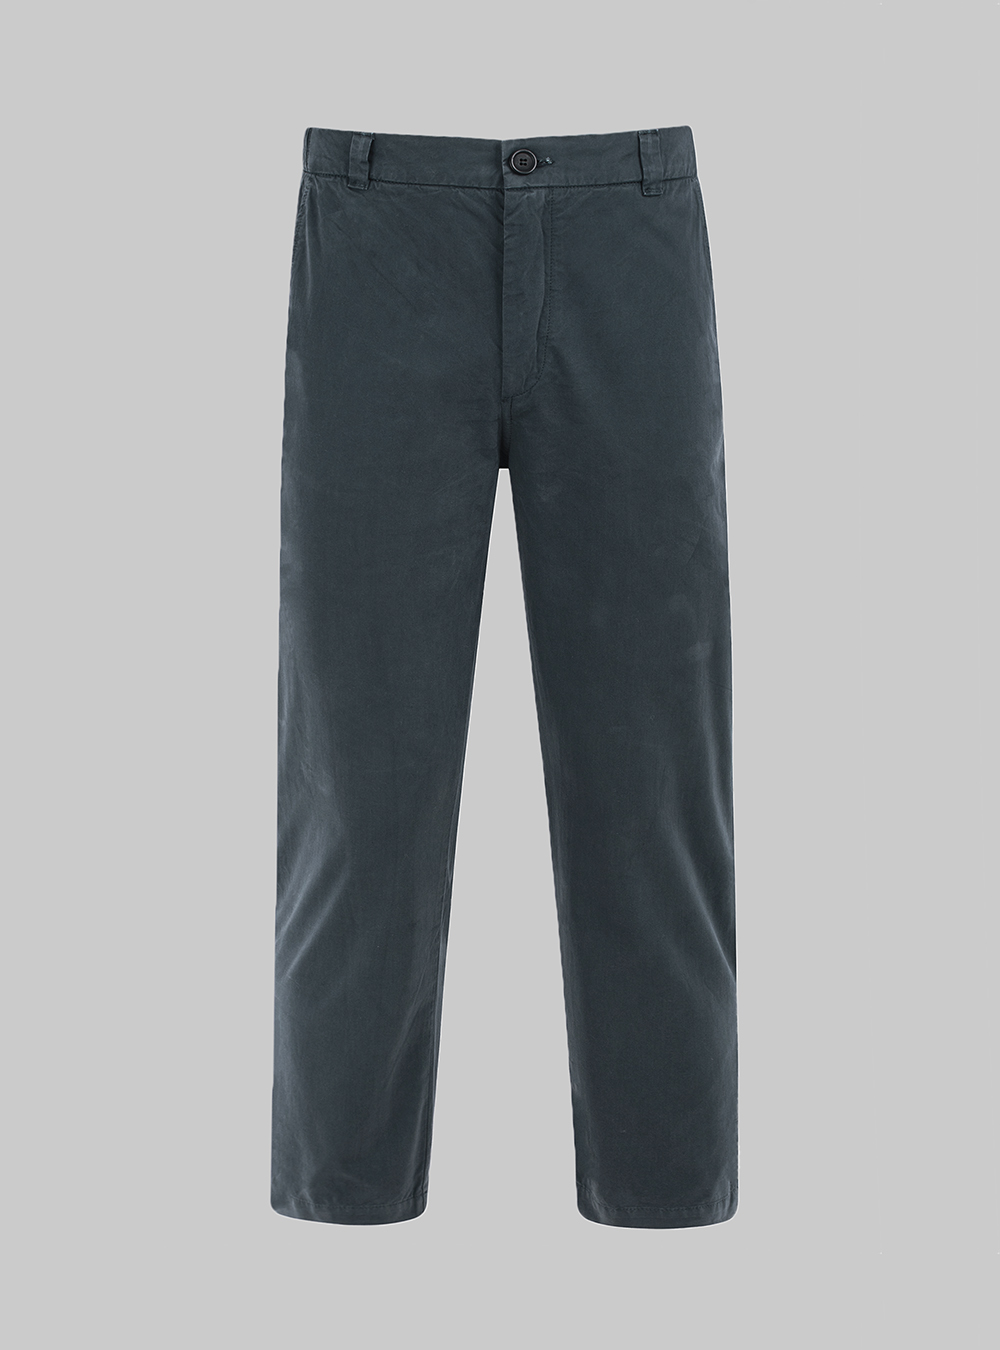 Essential chino pants (dark blue) in cotton, made in Portugal by wetheknot